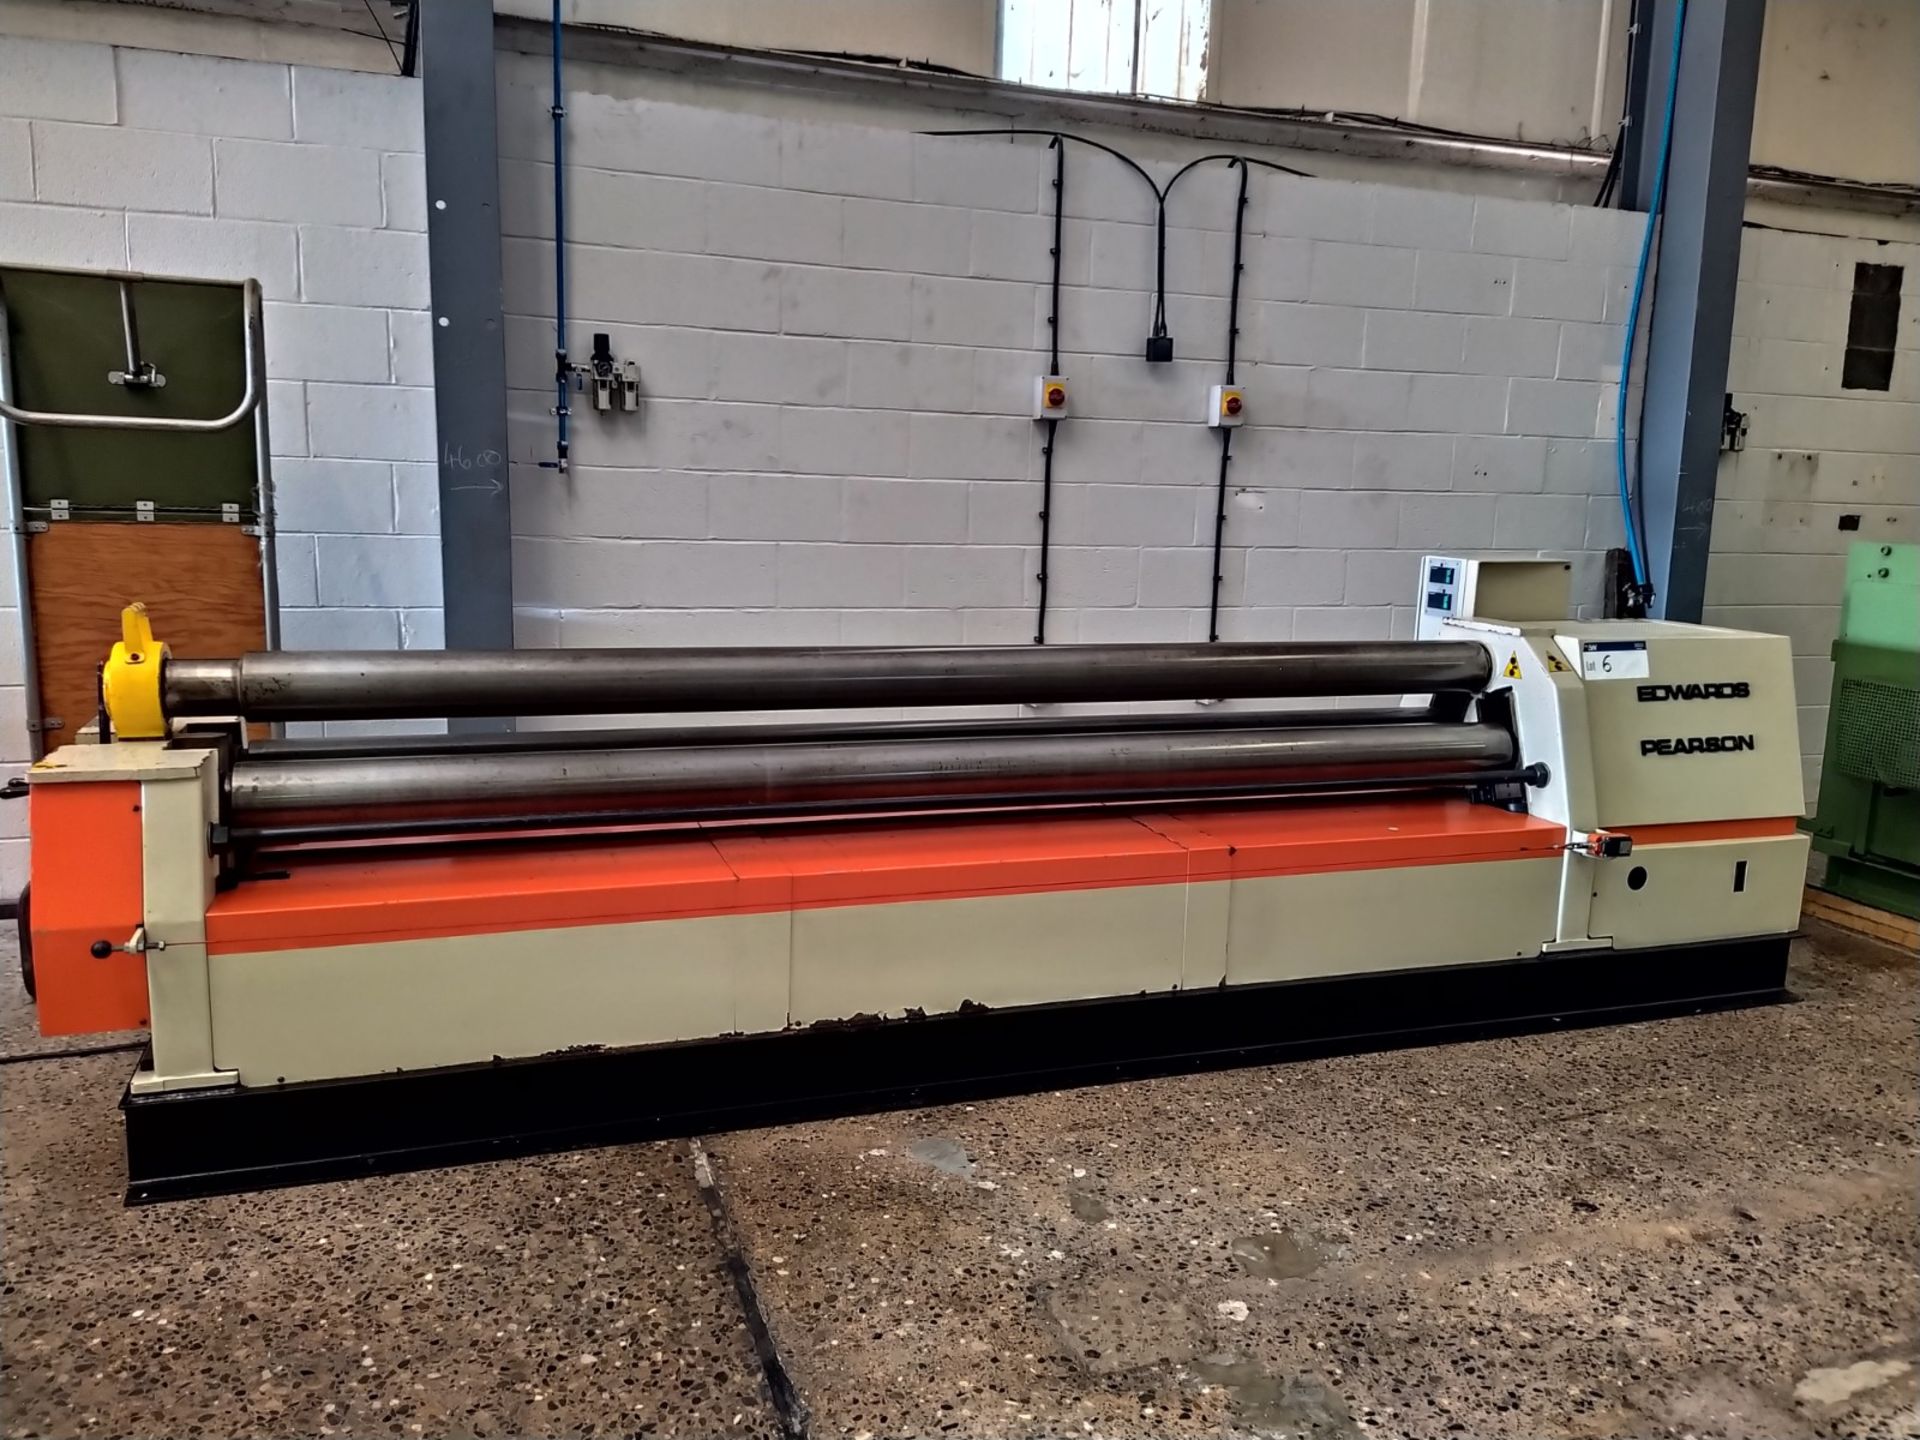 Edward Pearson AMB PICOT RCS150-30 PLATE ROLLING / BENDING MACHINE, serial no. 2003126, year of